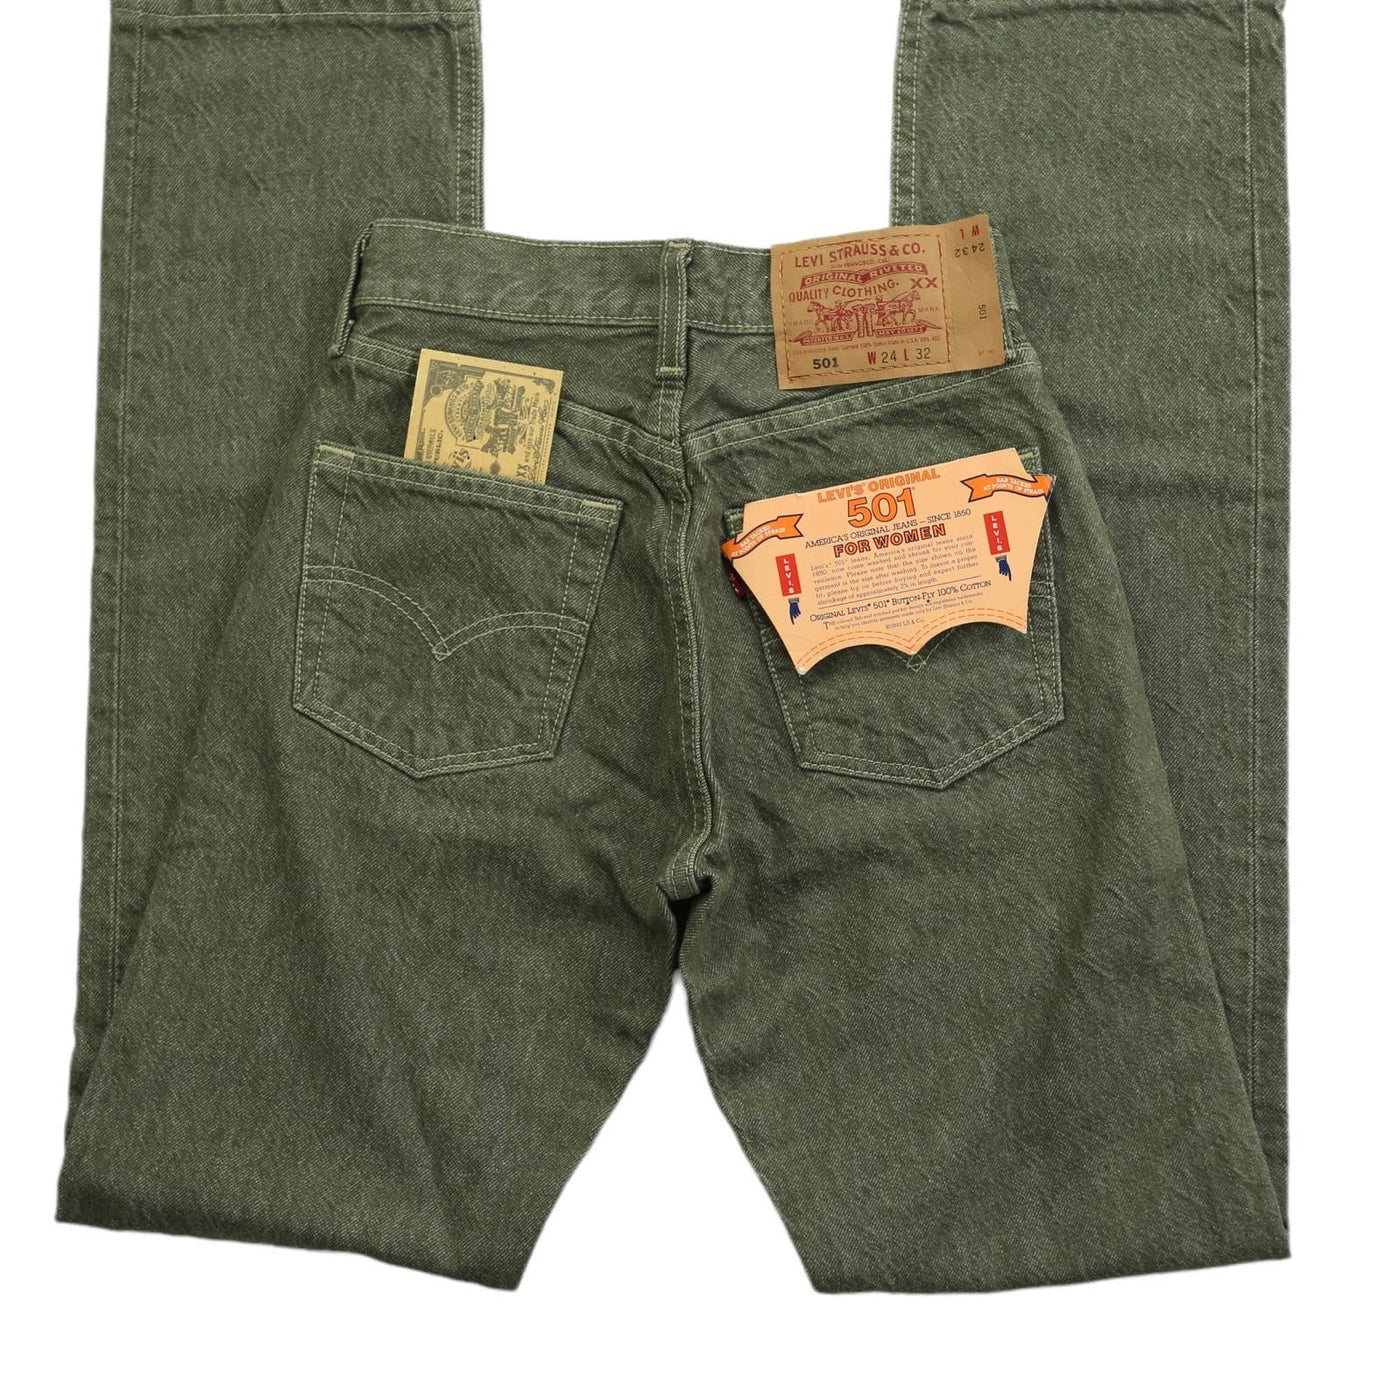 Vintage Levi’s 501 Deadstock Green Button Fly Jeans